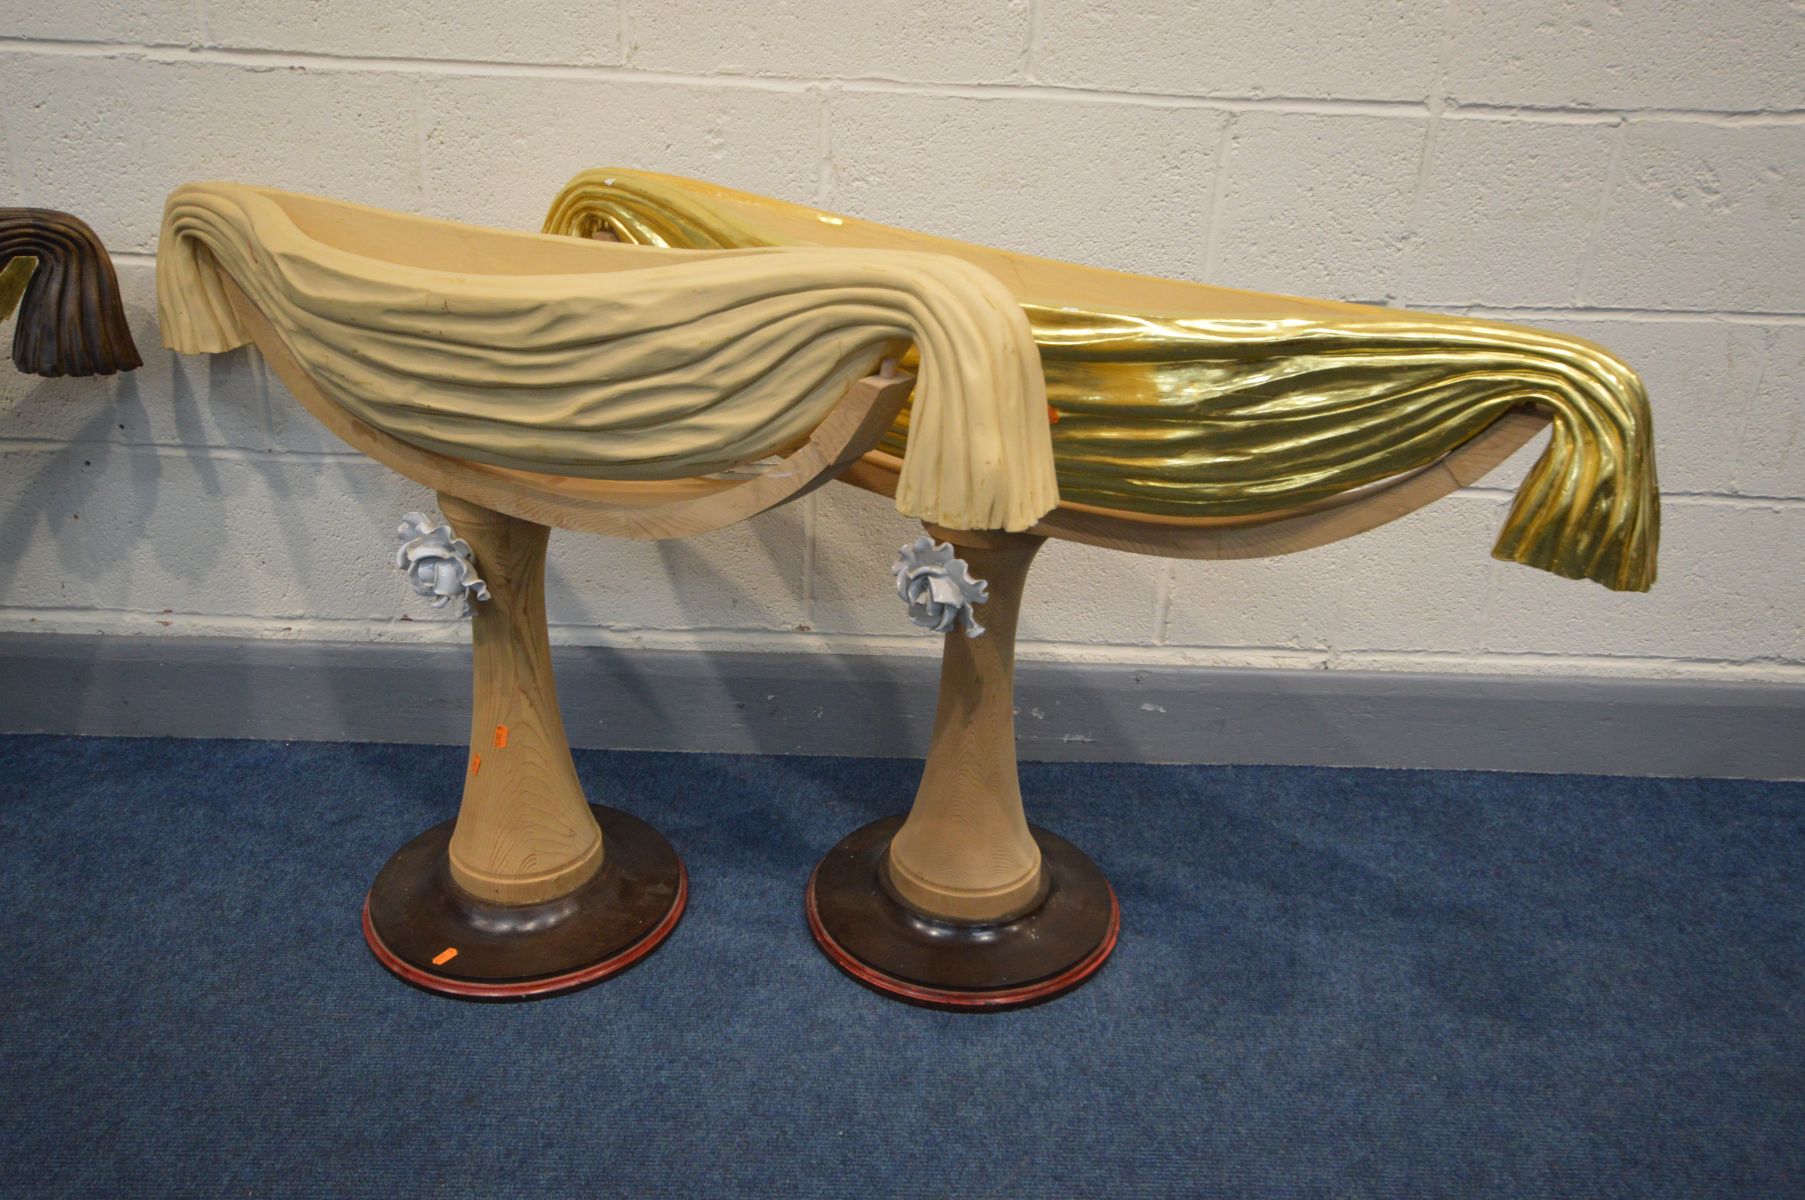 TWO PAIRS OF BESPOKE HAND CARVED PLANTERS, decorated as draped fabrics, on a cylindrical support, - Image 2 of 4